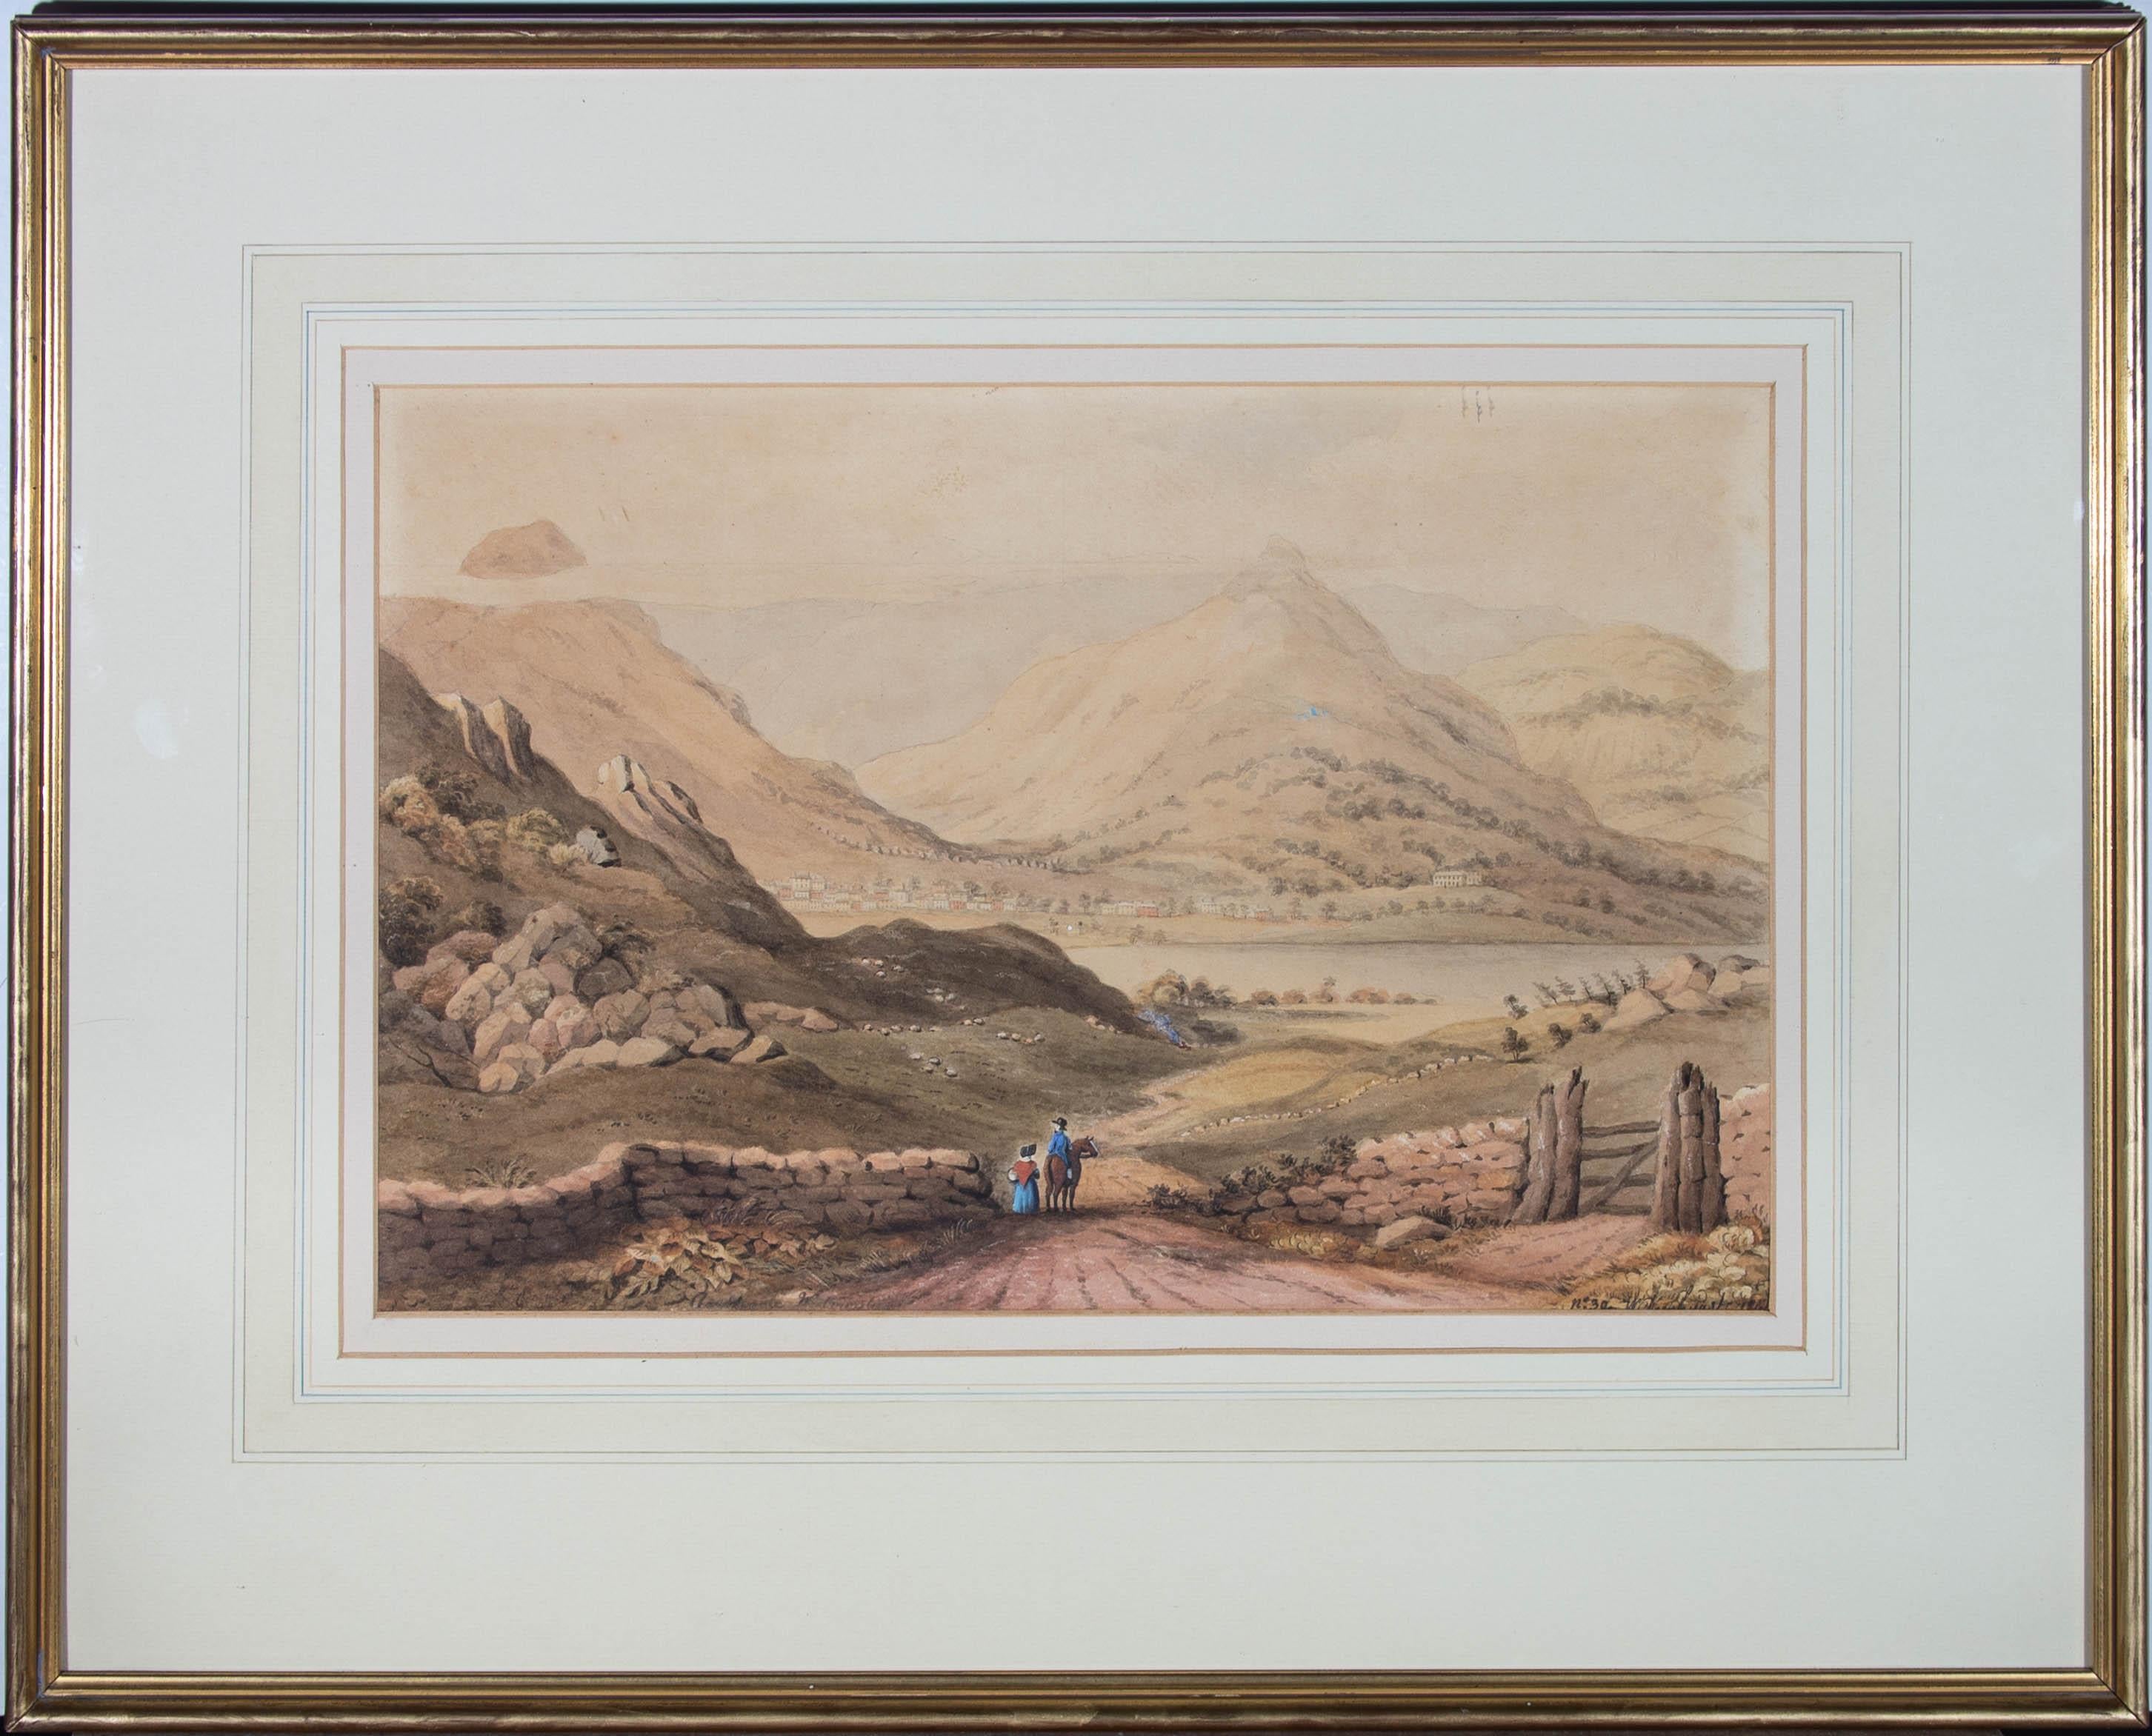 This charming watercolour scene depicts a figure riding a horse with a lady by his side down to a large lake. In the distance a small town can be scene before mountains. Signed and dated to the lower left. On wove.
